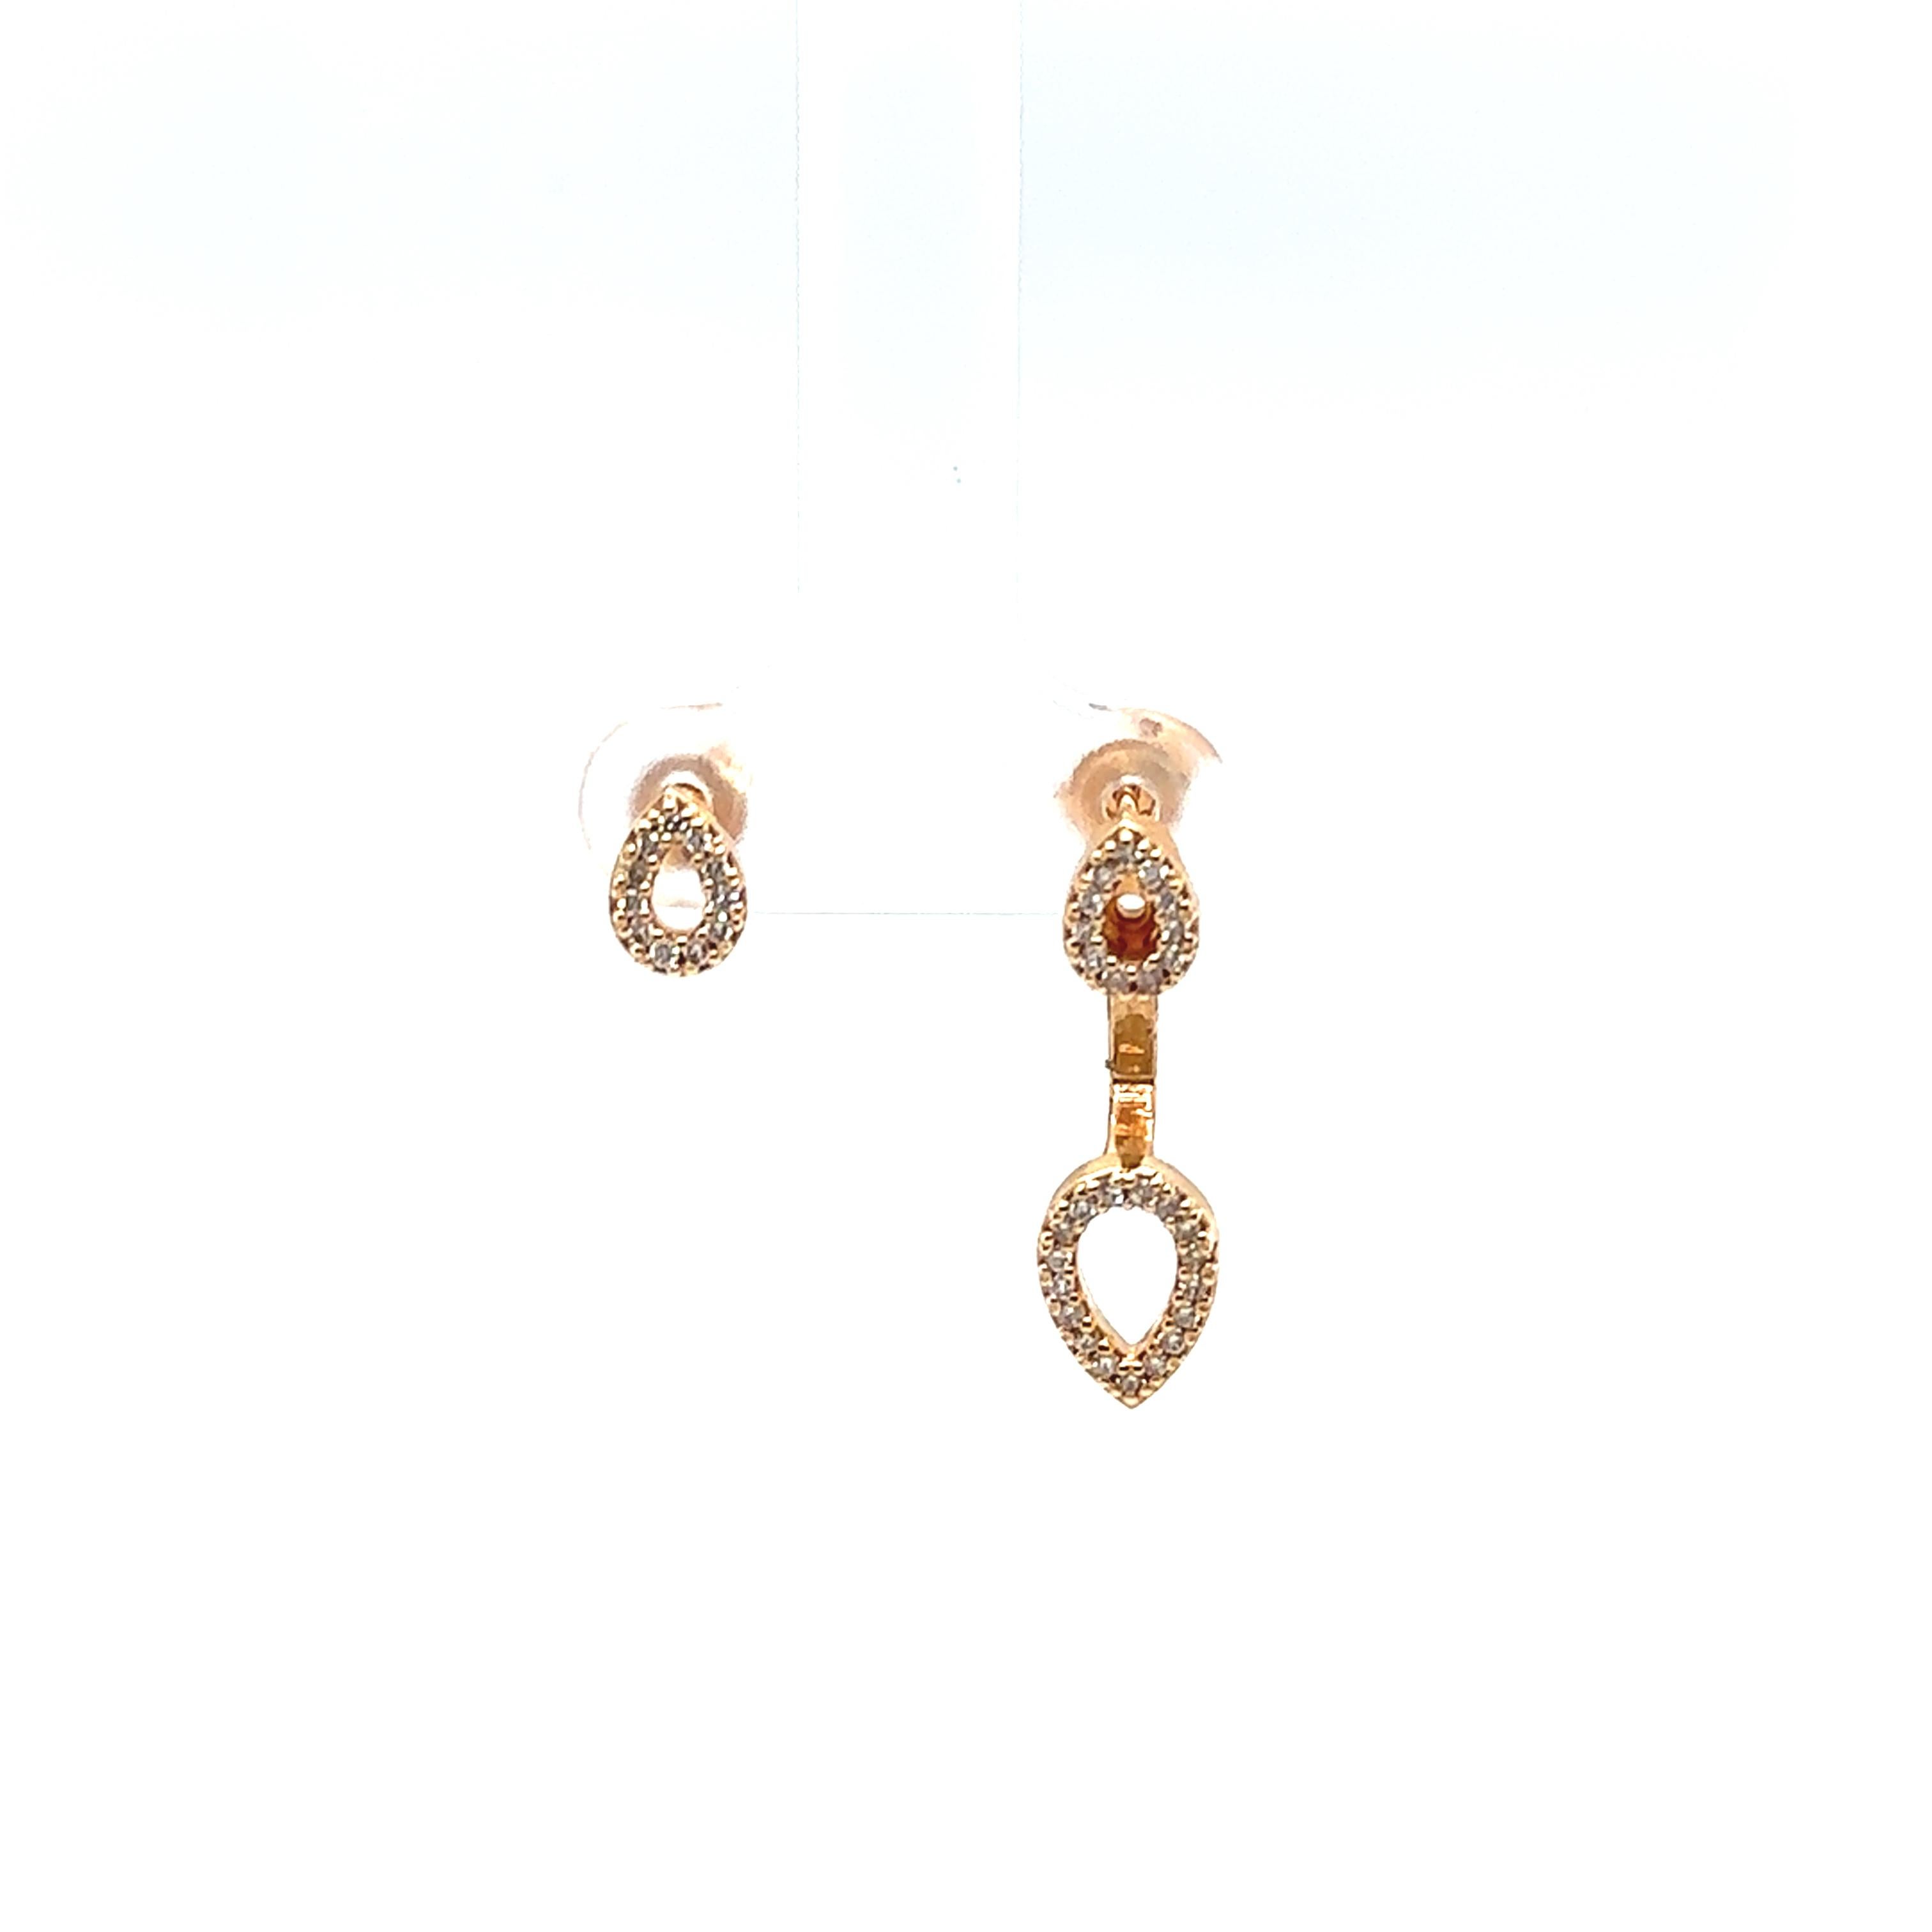 New Fine Quality Drops & Studs Earrings Set with Diamonds in 18ct Rose Gold In New Condition For Sale In London, GB